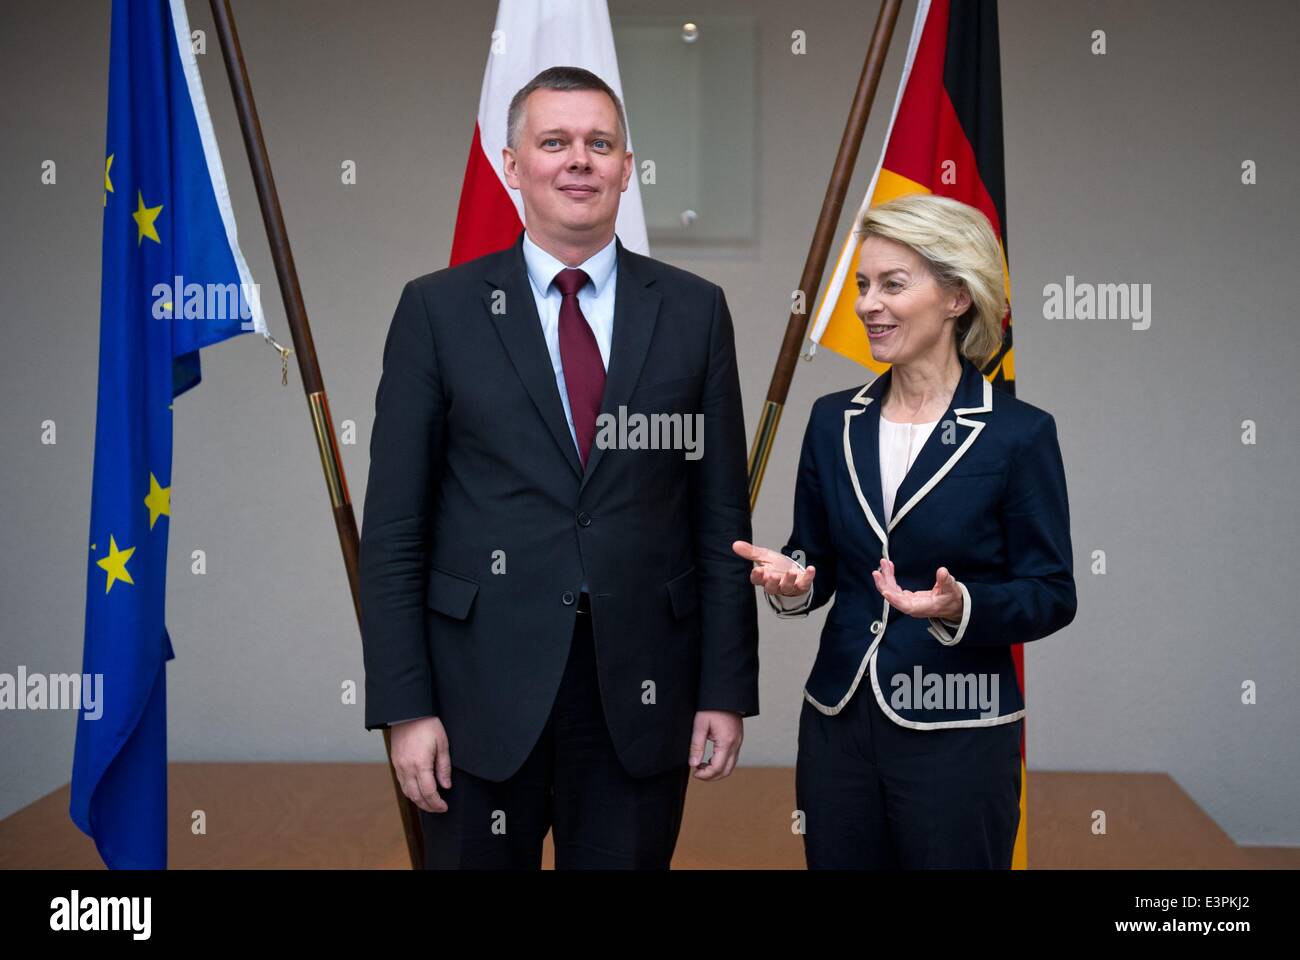 Berlin, Germany. 27th June, 2014. German Defense Minister Ursula von der Leyen receives Polish Defense Minister Tomasz Siemoniak in Berlin, Germany, 27 June 2014. The preparations for the NATO summit in Wales in September were at the center of the talks. Photo: DANIEL NAUPOLD/dpa/Alamy Live News Stock Photo